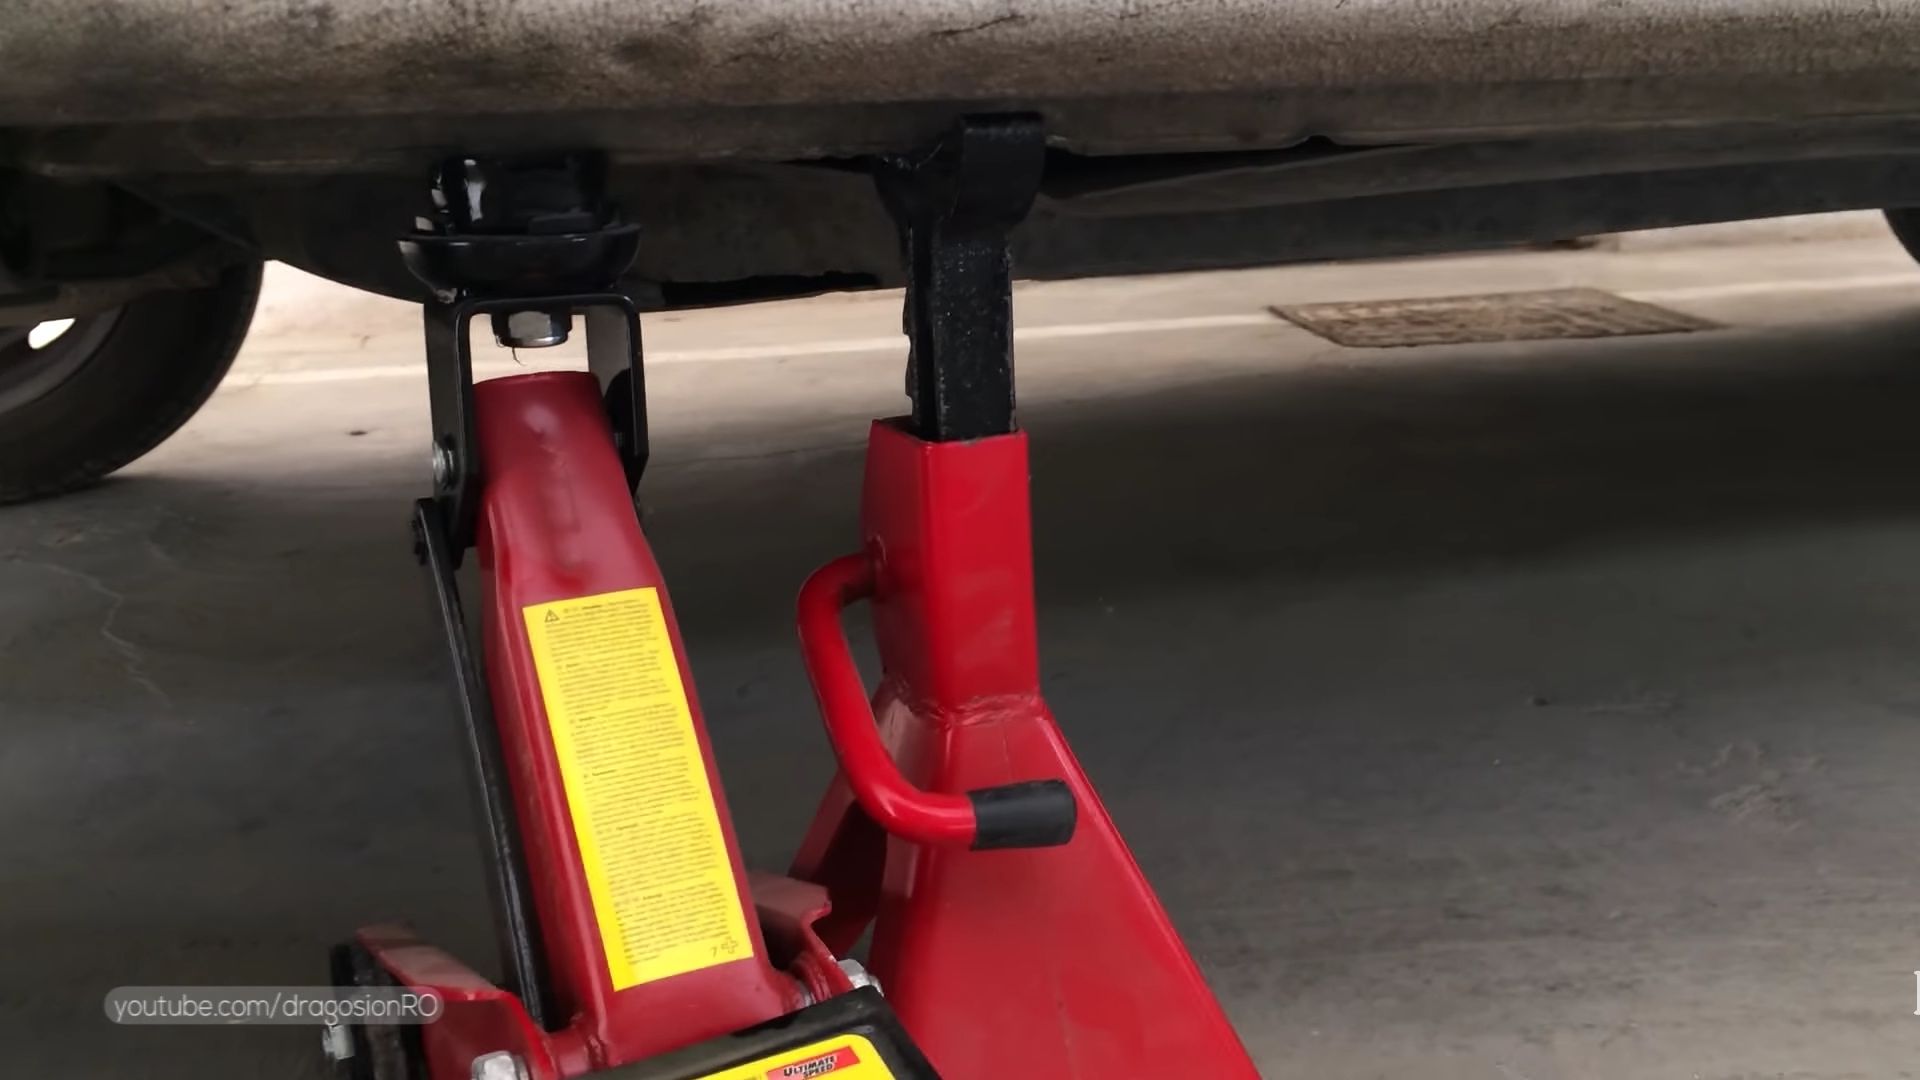 Lift car on jack and use jack stands